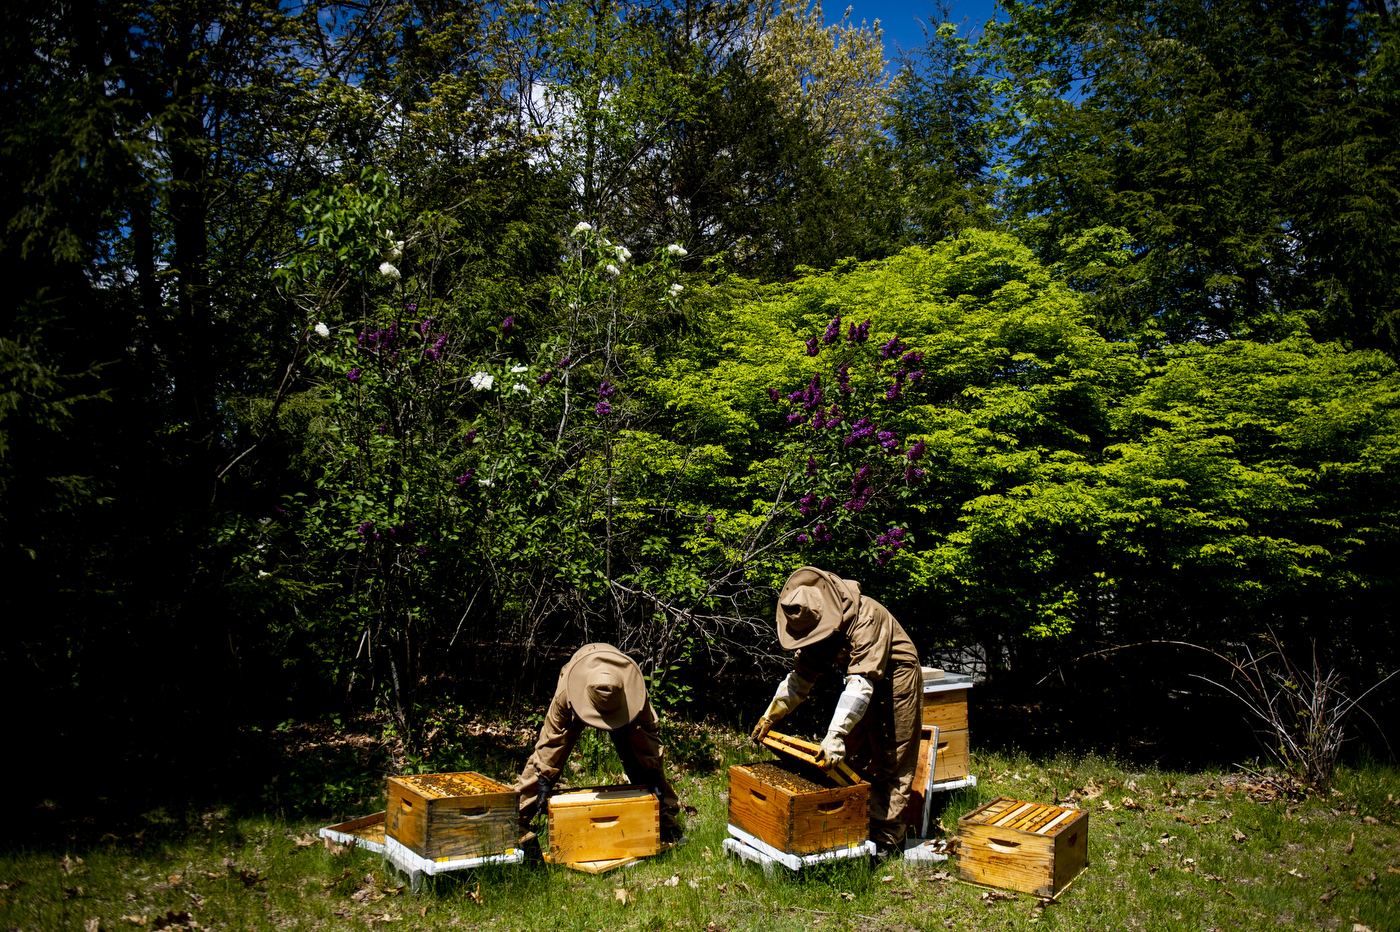 Two beekeepers inspecting bee hives